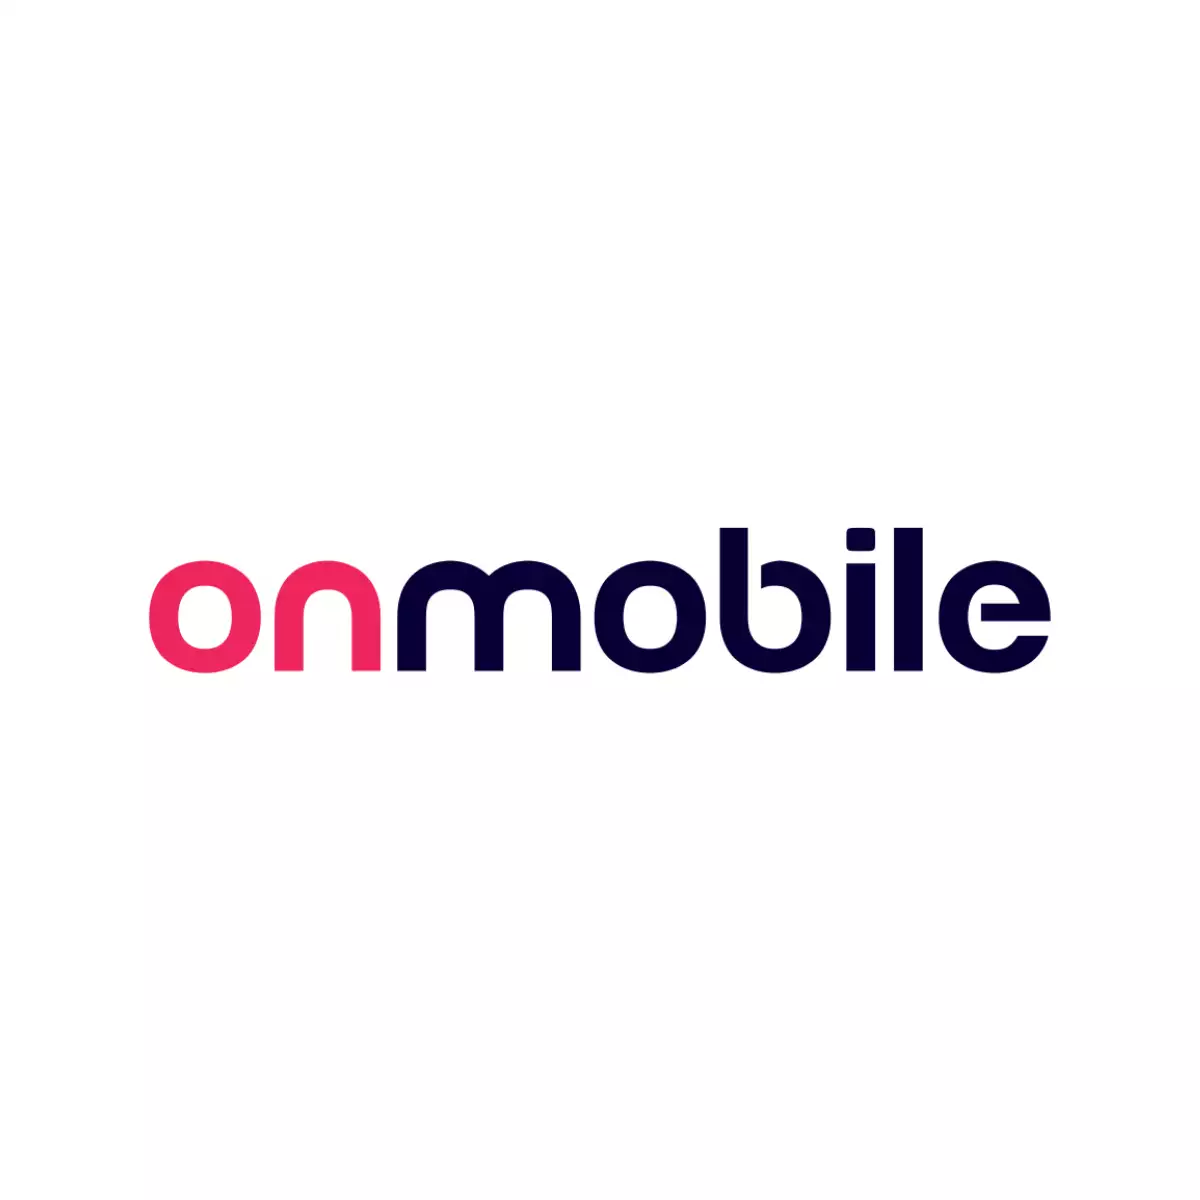 OnMobile Global Announces New CEO and Shifts Focus to Gaming